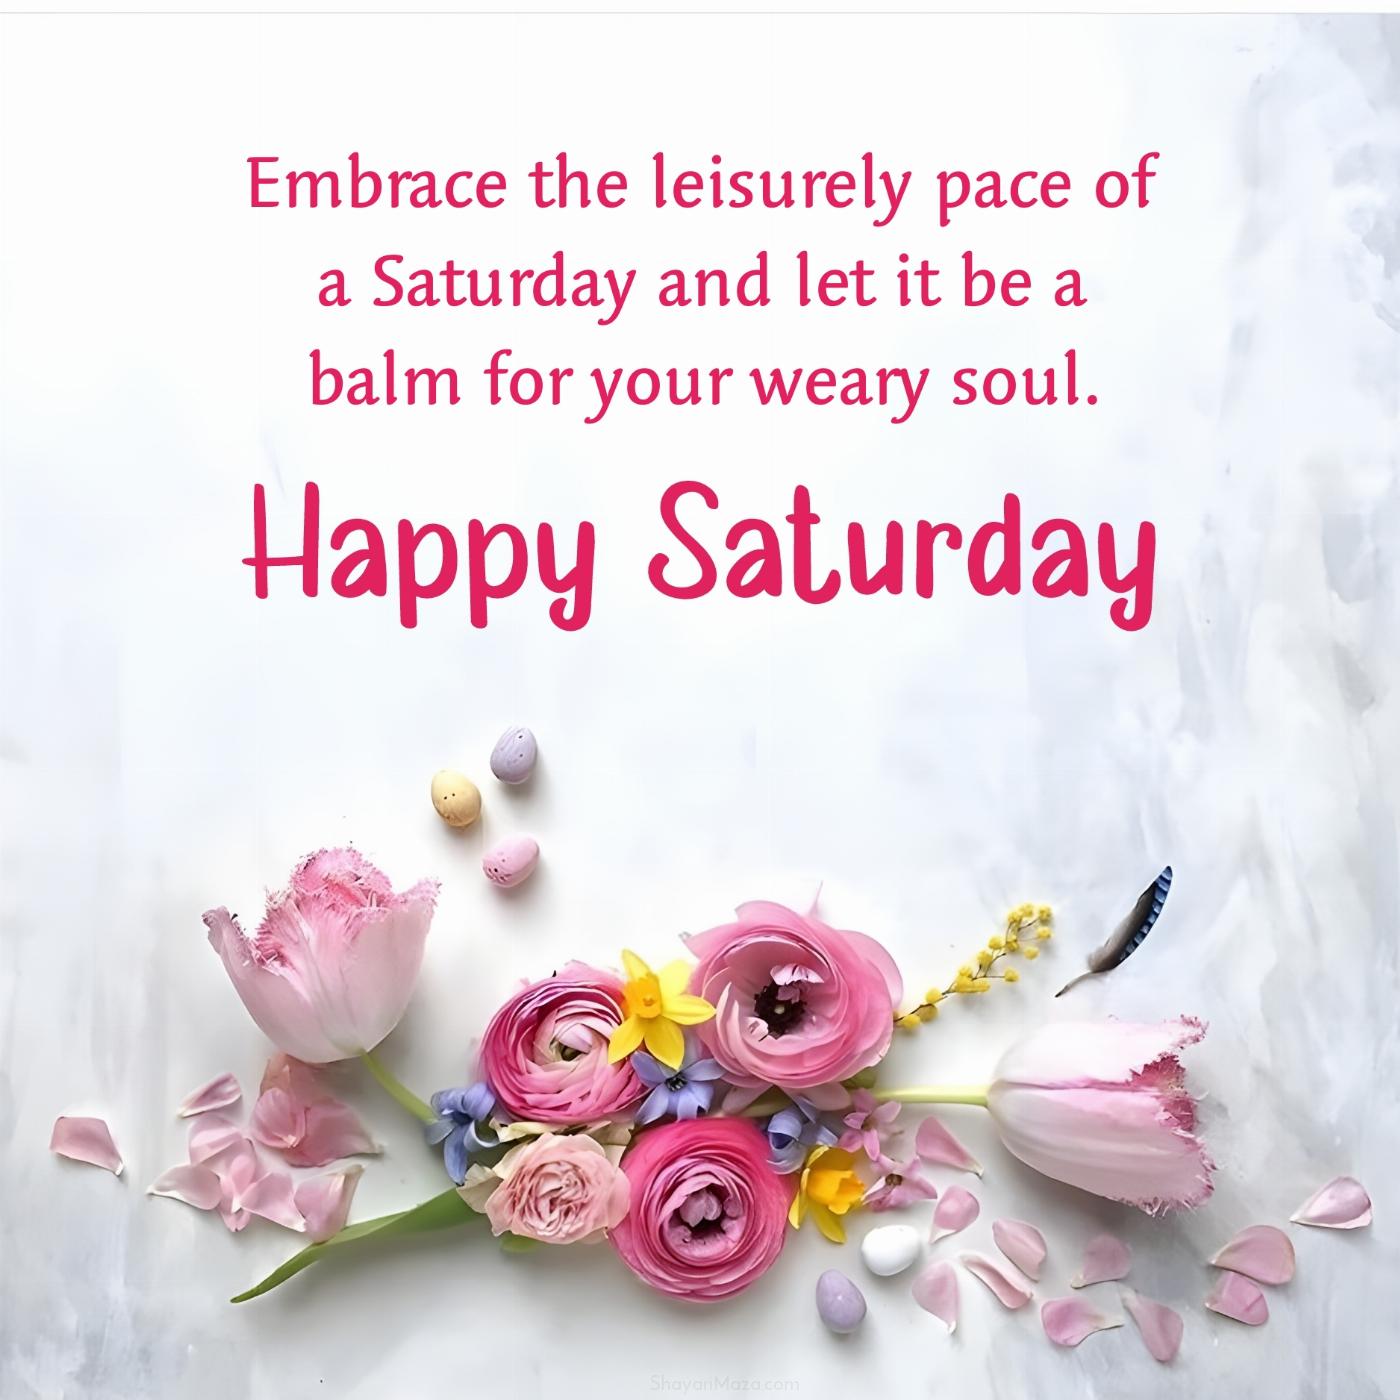 Embrace the leisurely pace of a Saturday and let it be a balm